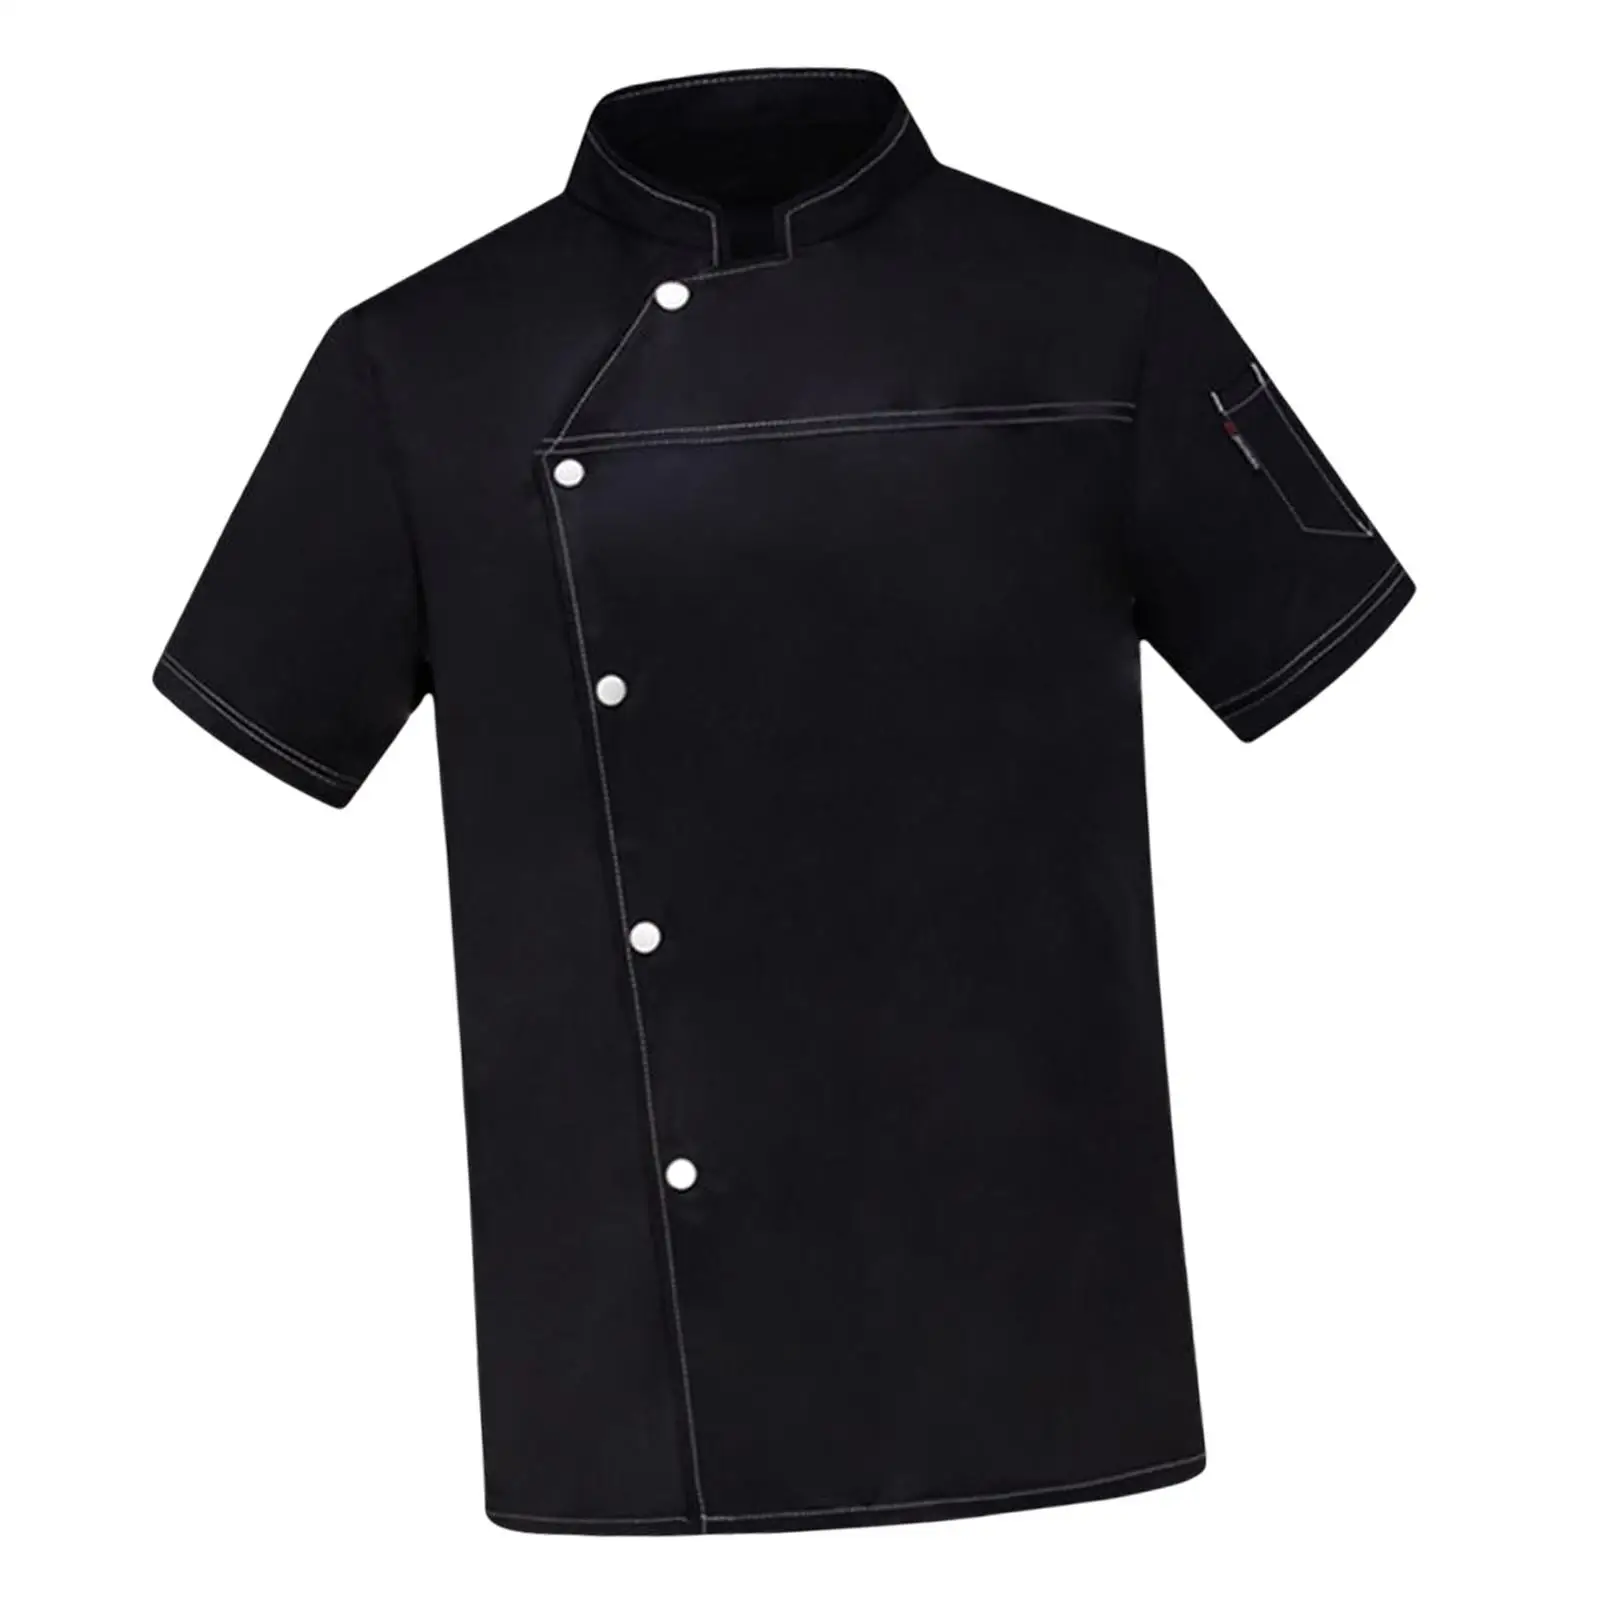 Chef Coat Short Sleeve Top Workwear Chef Clothes Waiter Waitress Apparel Cooking Breathable Chef Jacket for Food Service Bakery